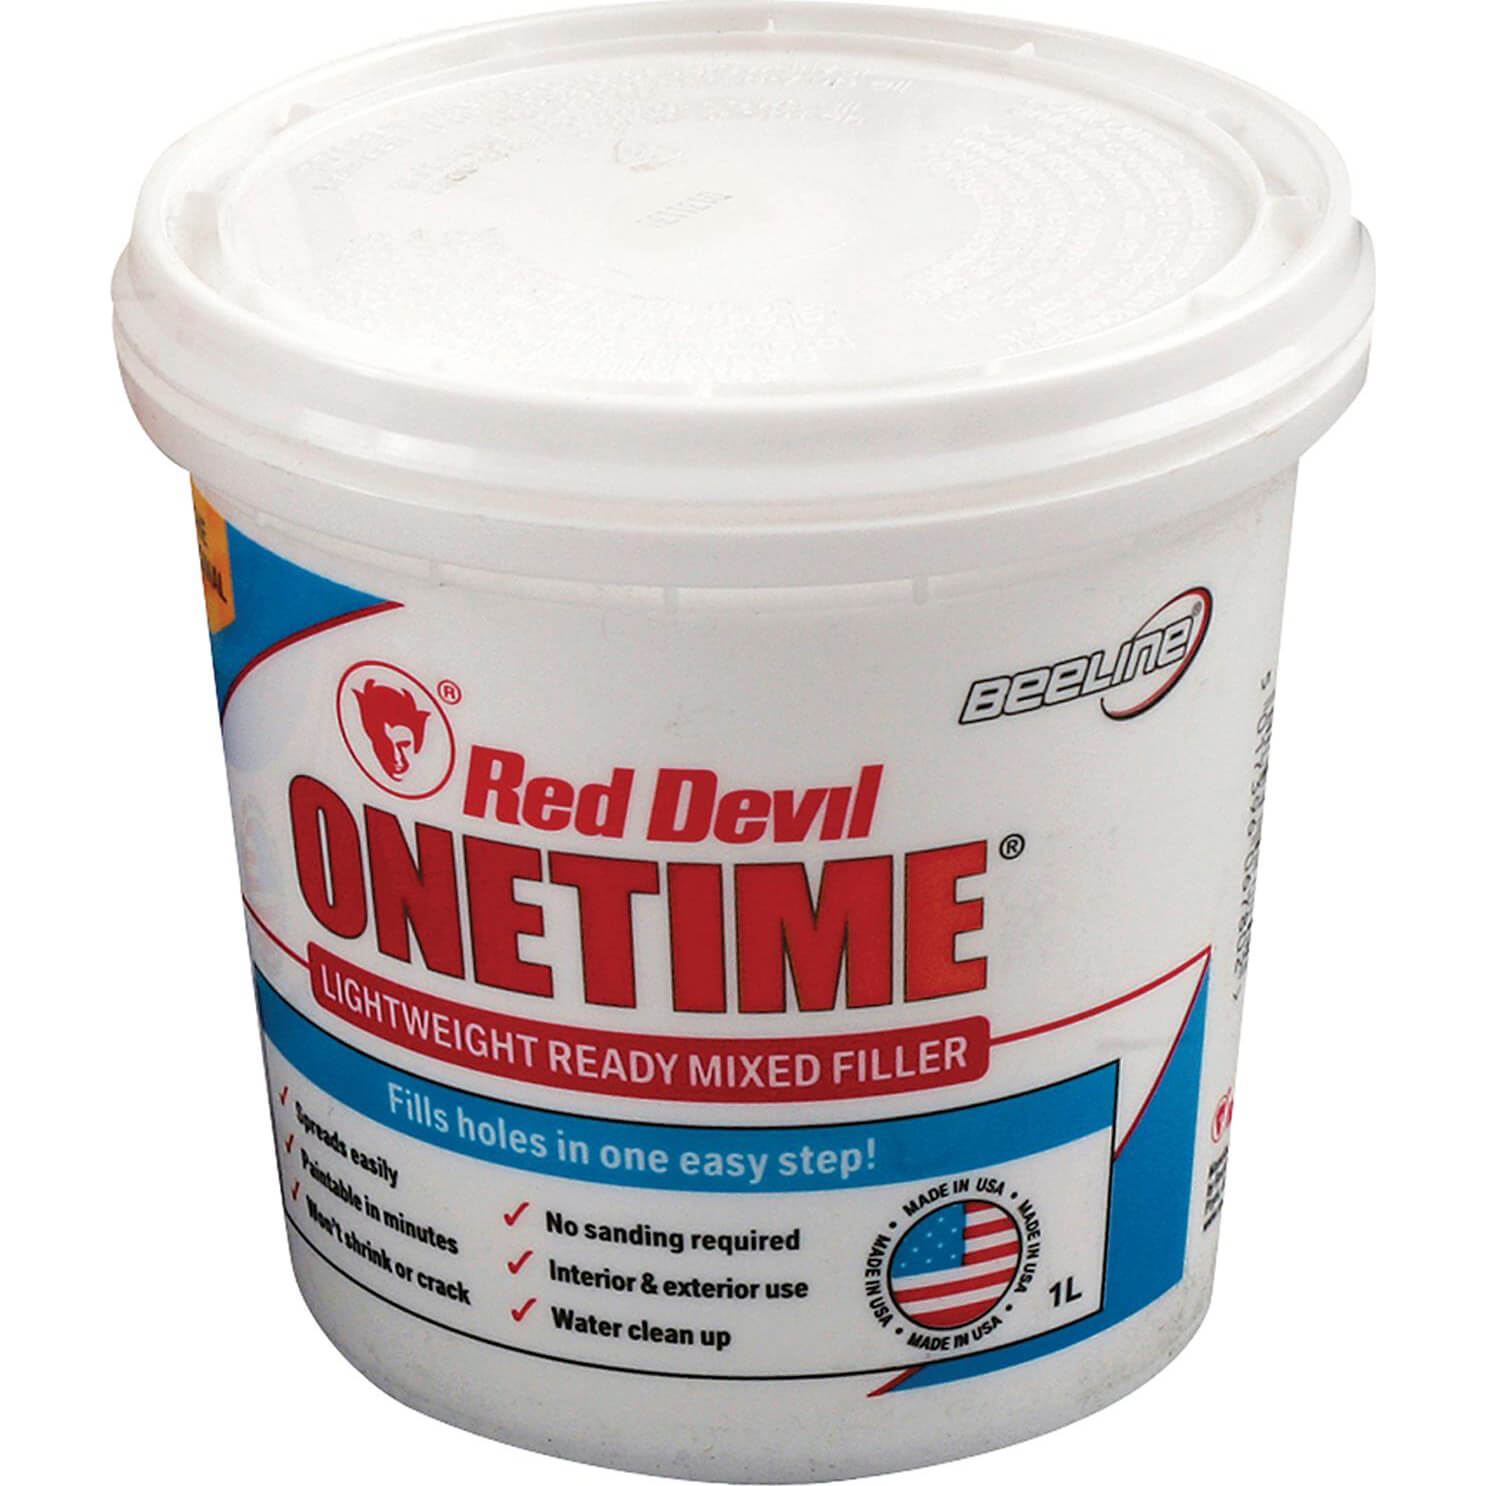 Image of Red Devil Onetime Ready Mixed Filler 1l